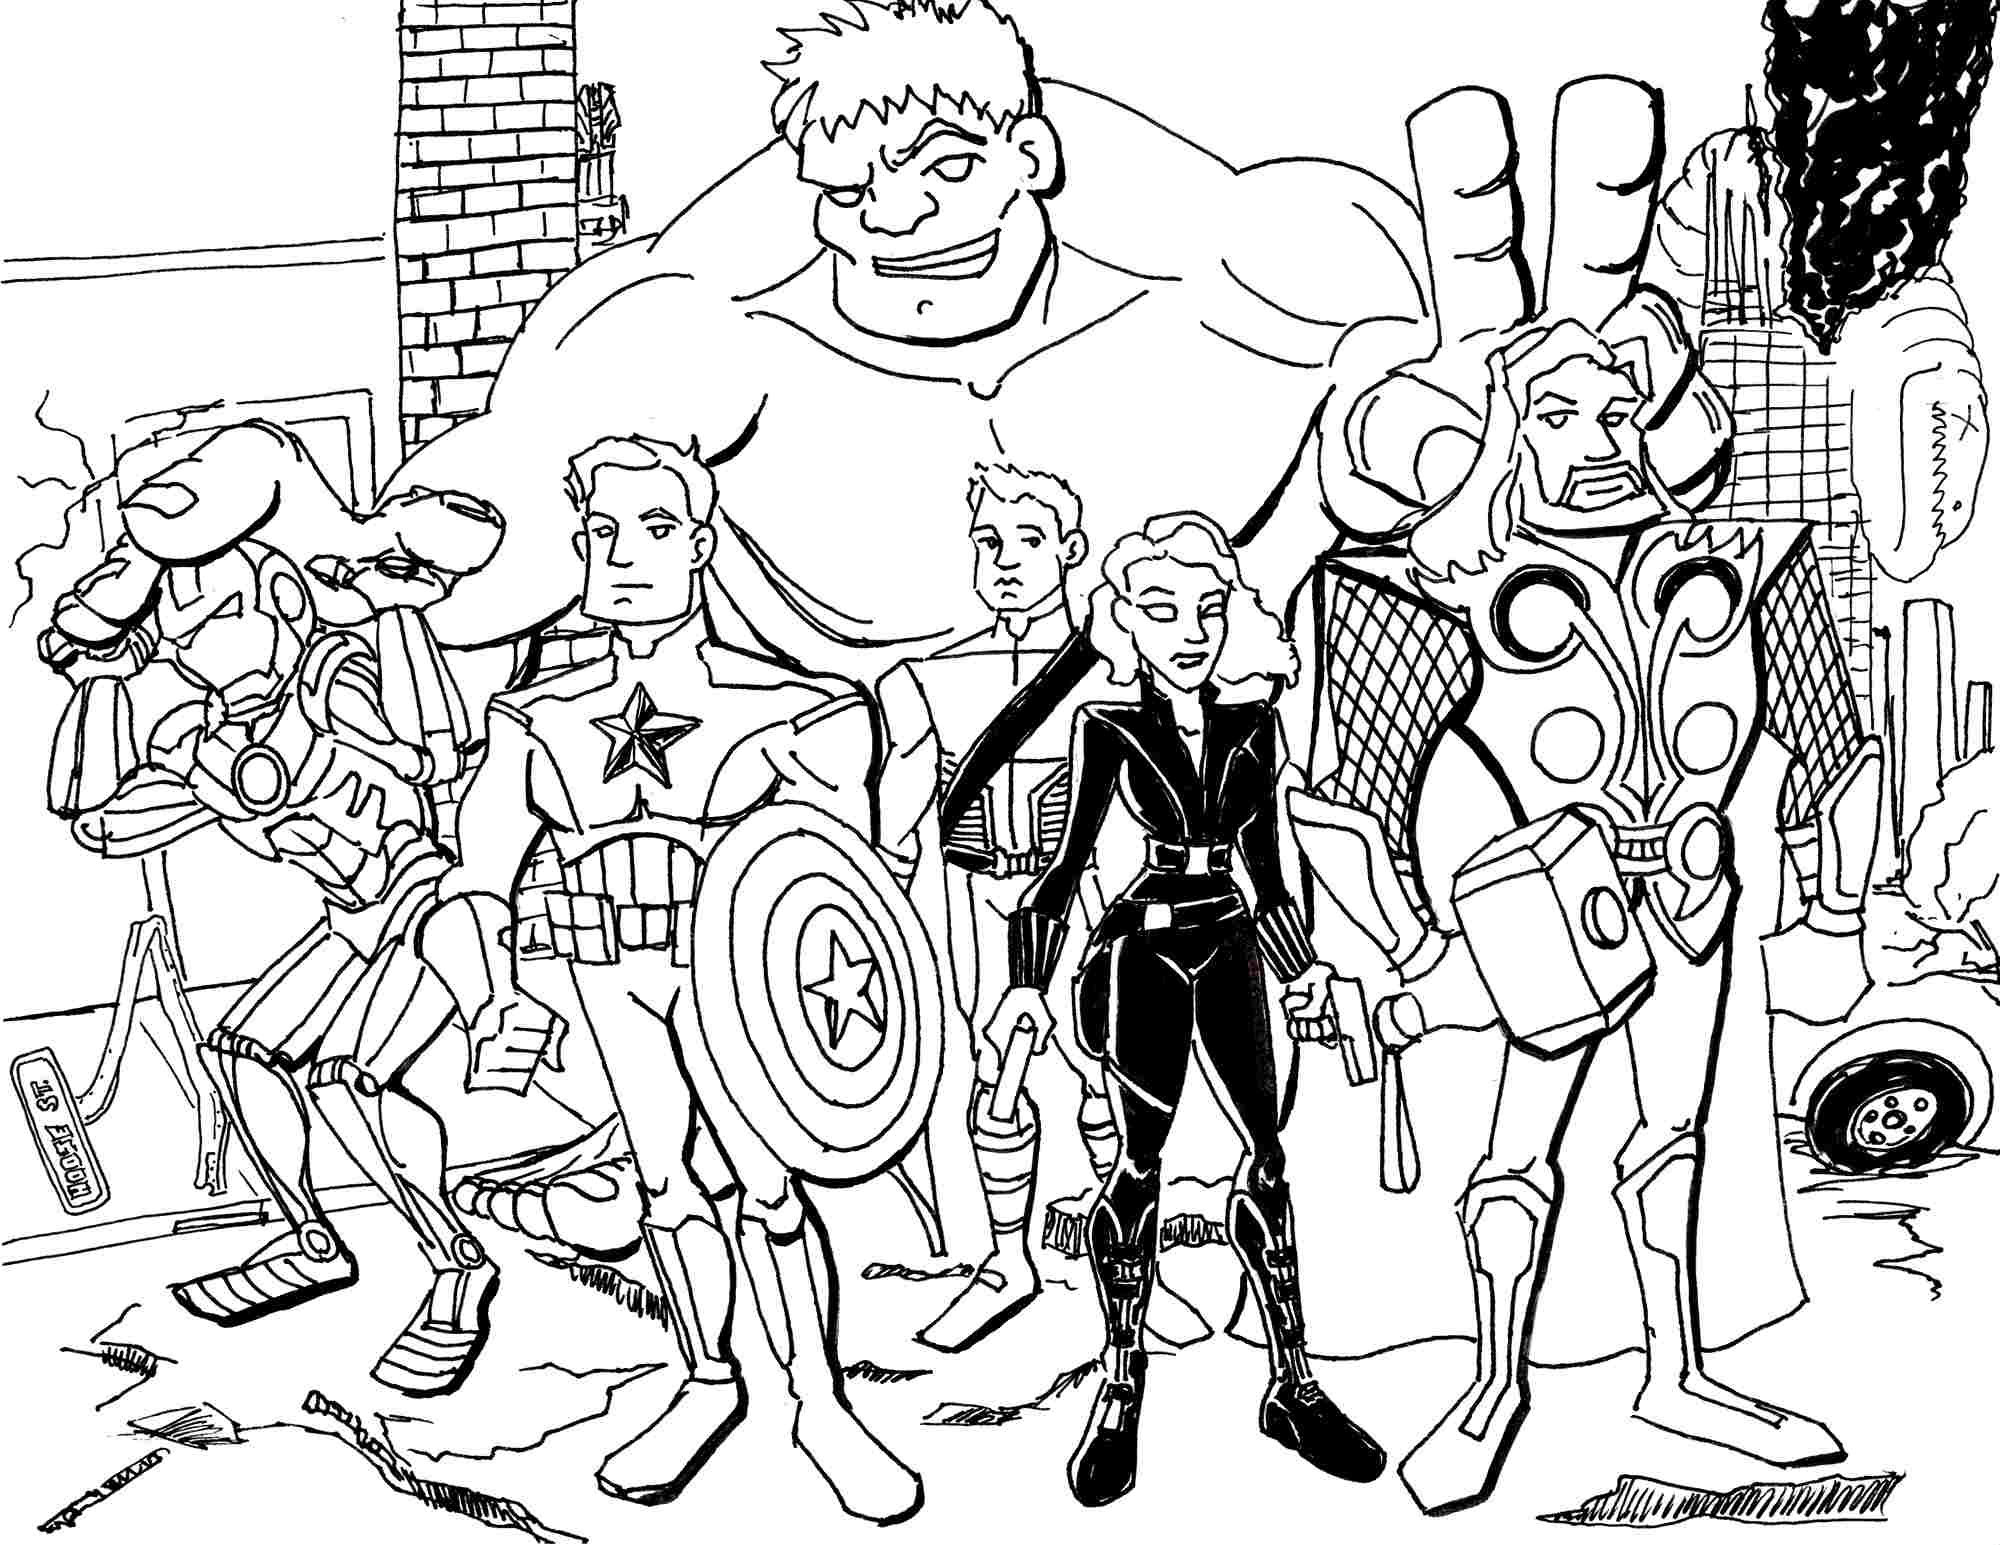 Drawing Avengers 74212 (Superheroes) Printable coloring pages